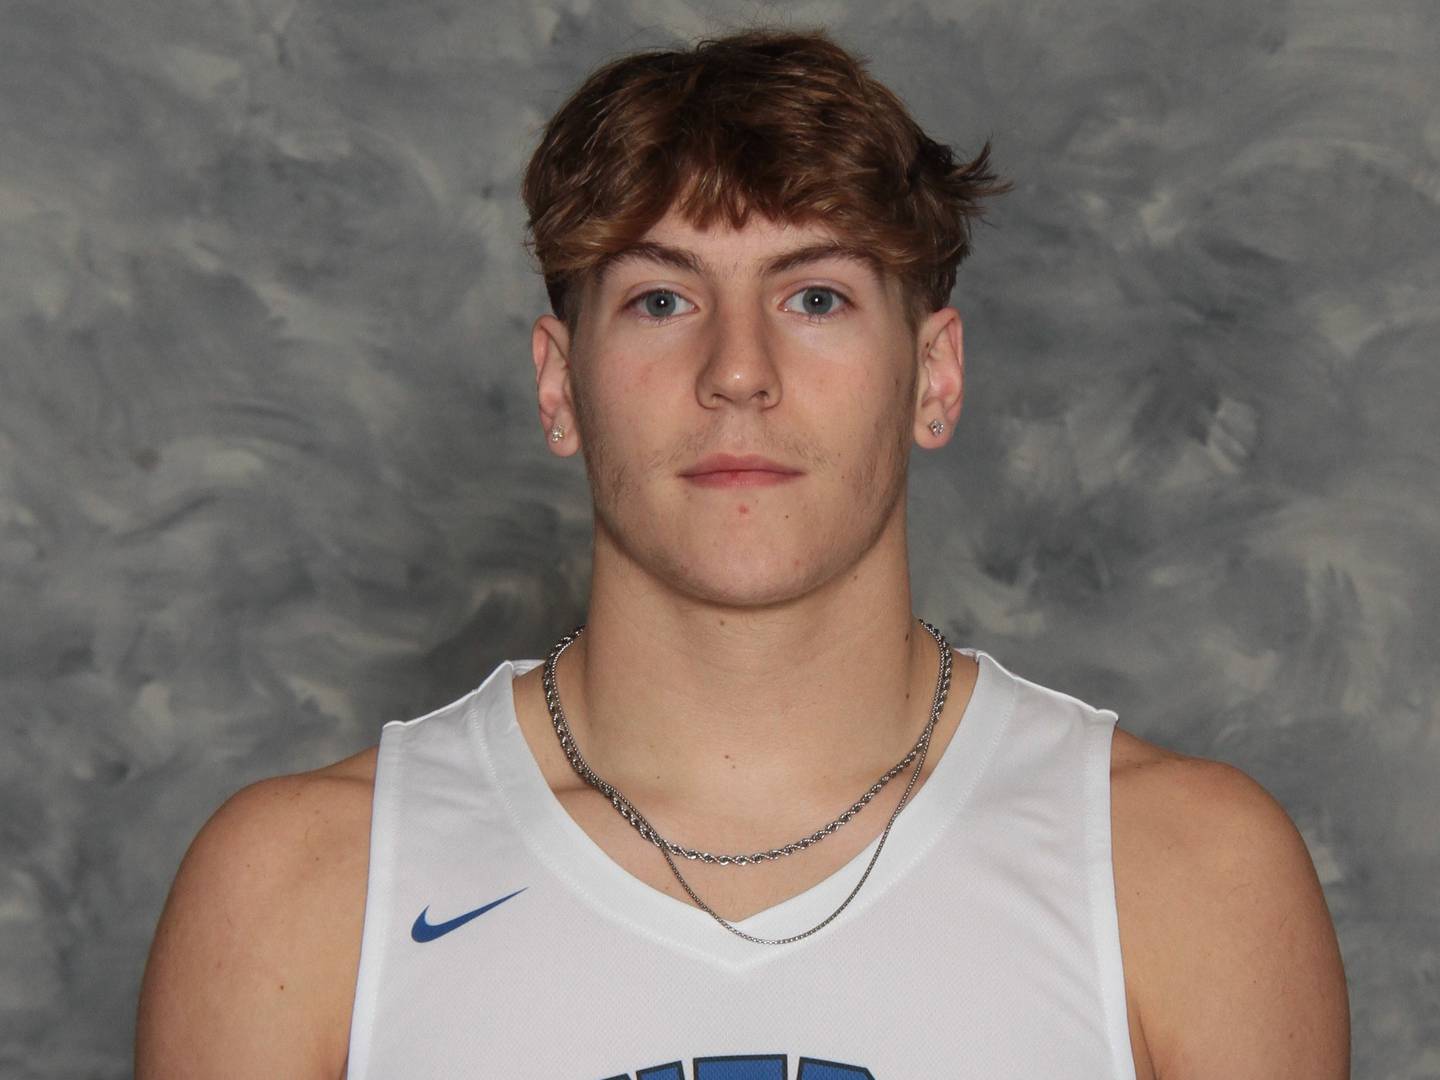 Burlington Central's Gavin Sarvis is the 2022 Northwest Herald Boys Basketball Player of the Year.